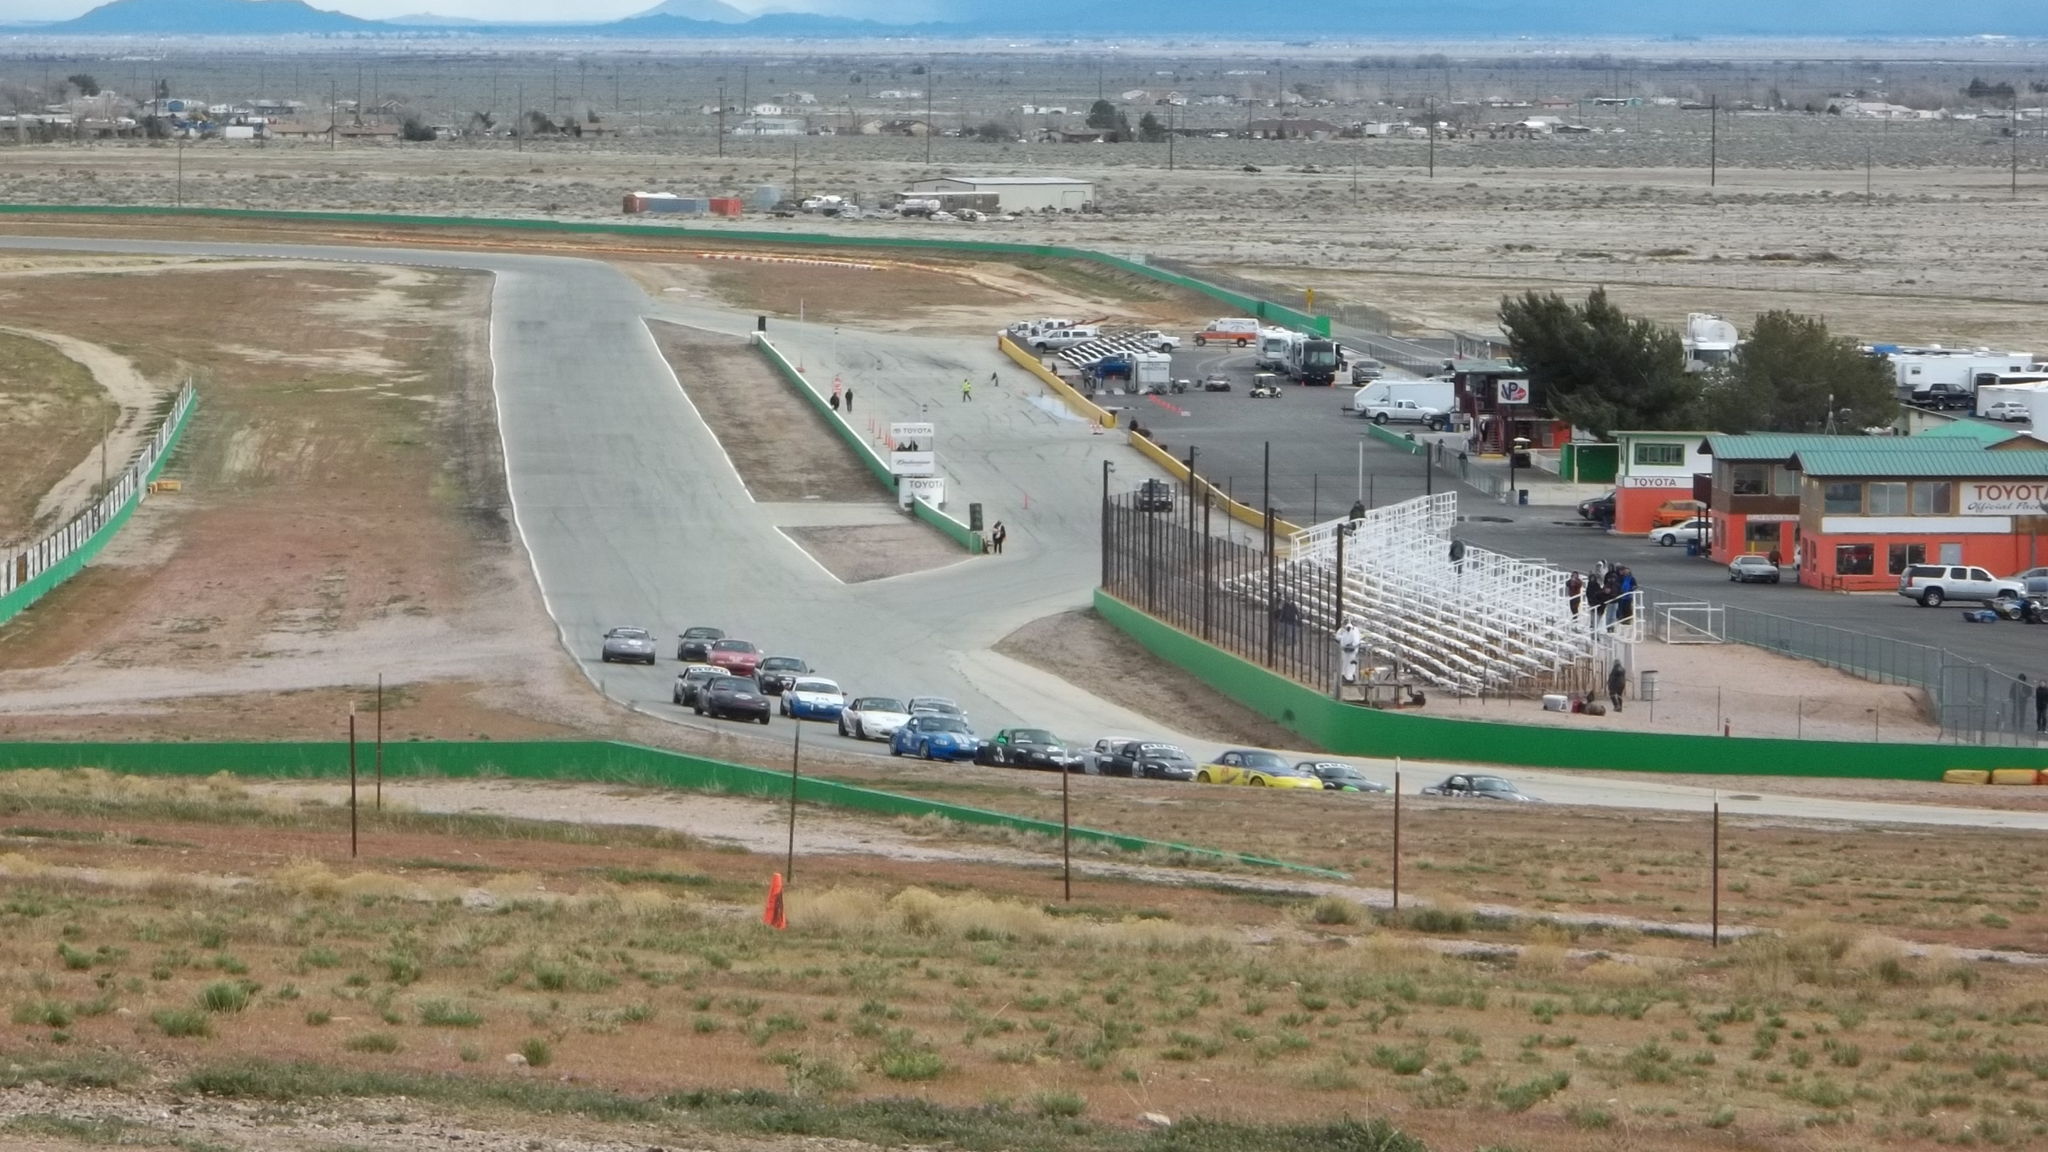 CANCELLED: U.S. Majors At Willow Springs